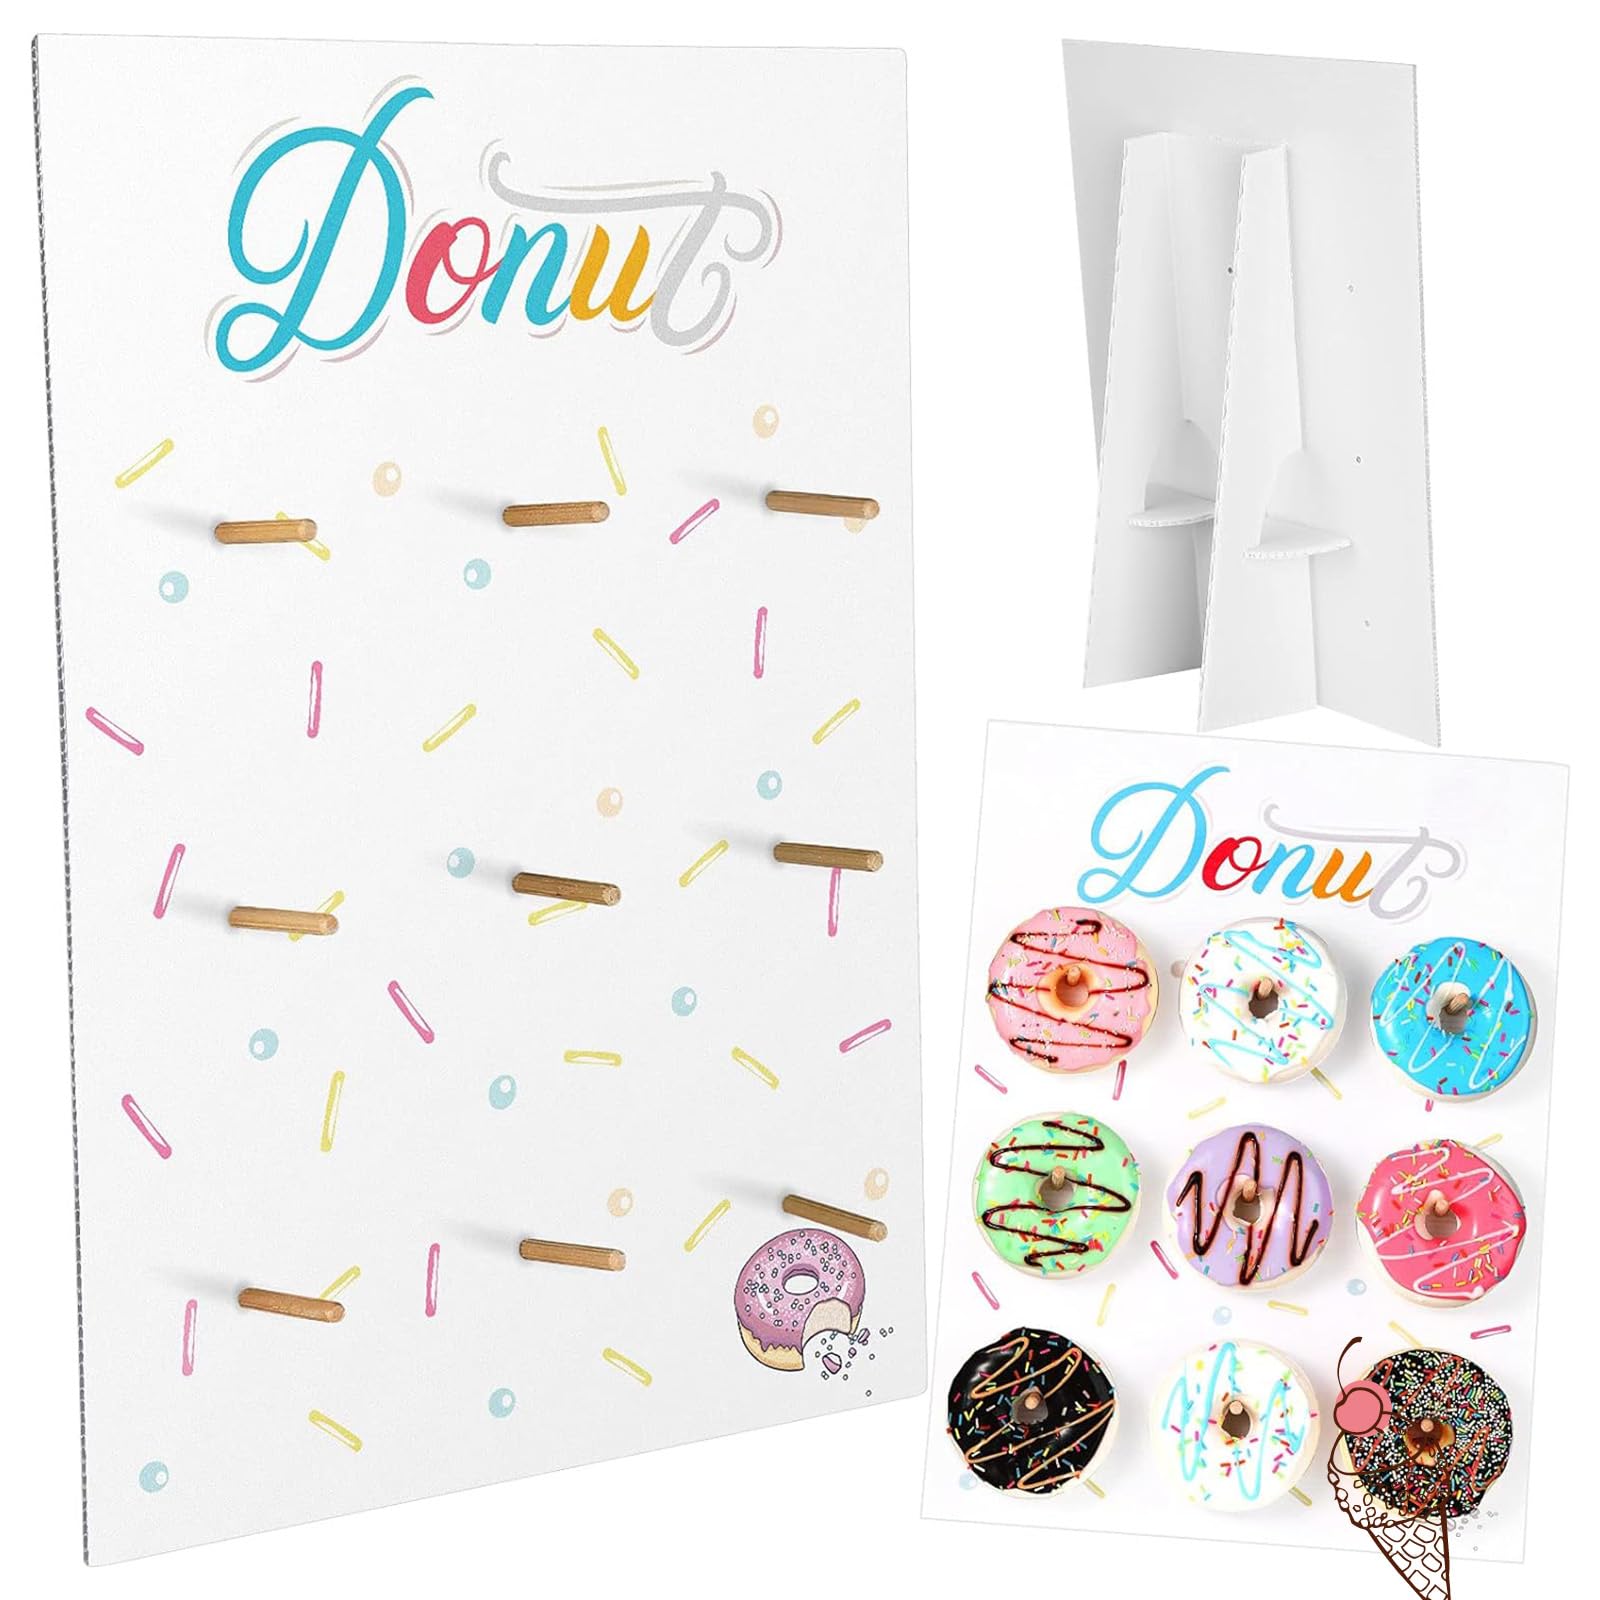 Wall Display Stand Reusable Donut Holder Board with Rustic Wood for Party Decorations Supplies Dessert Table at Wedding Birthday Baby Shower Treat (White)